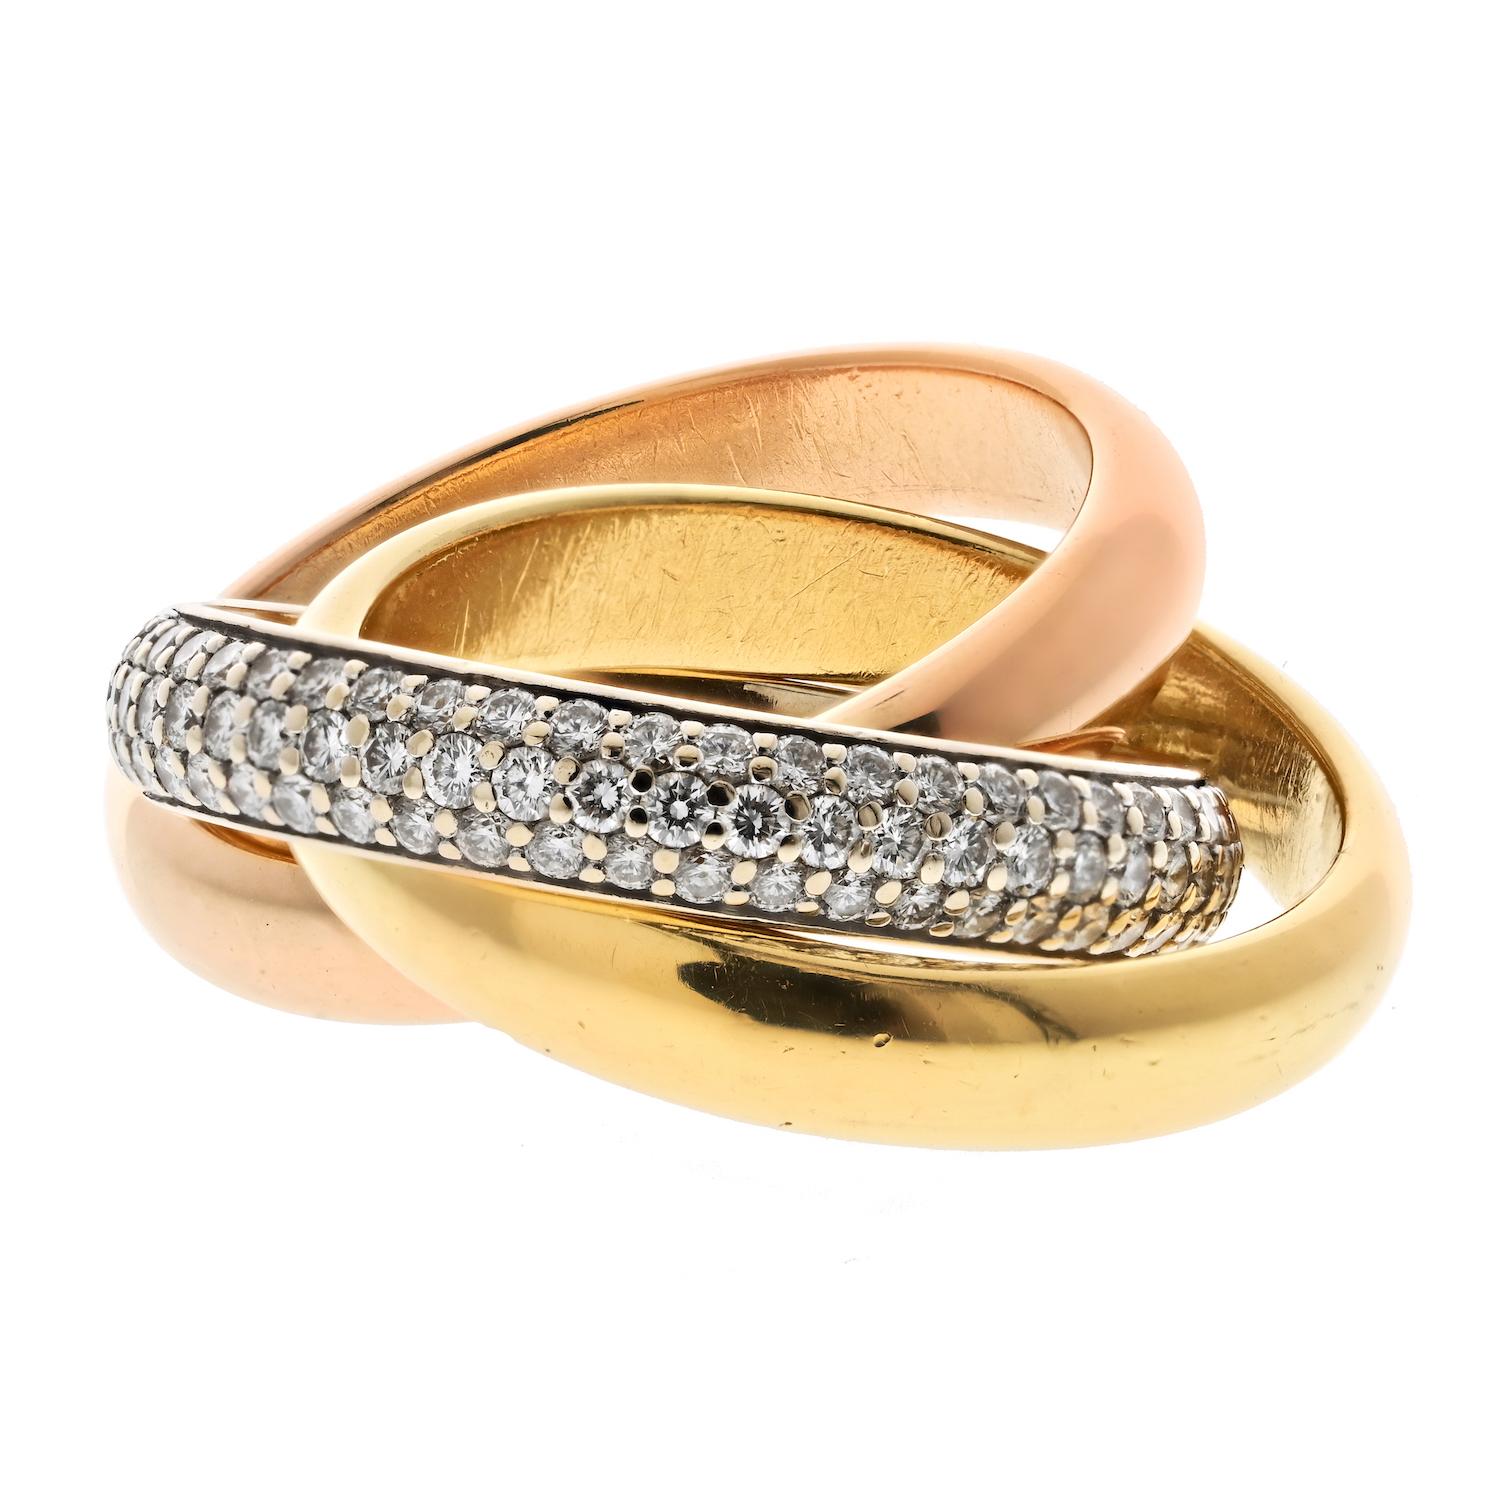 The Trinity de Cartier ring is popular due to its unique design and the significance of the intertwined three bands representing love, friendship, and loyalty. Its association with the luxury brand Cartier also adds to its popularity.
Available for